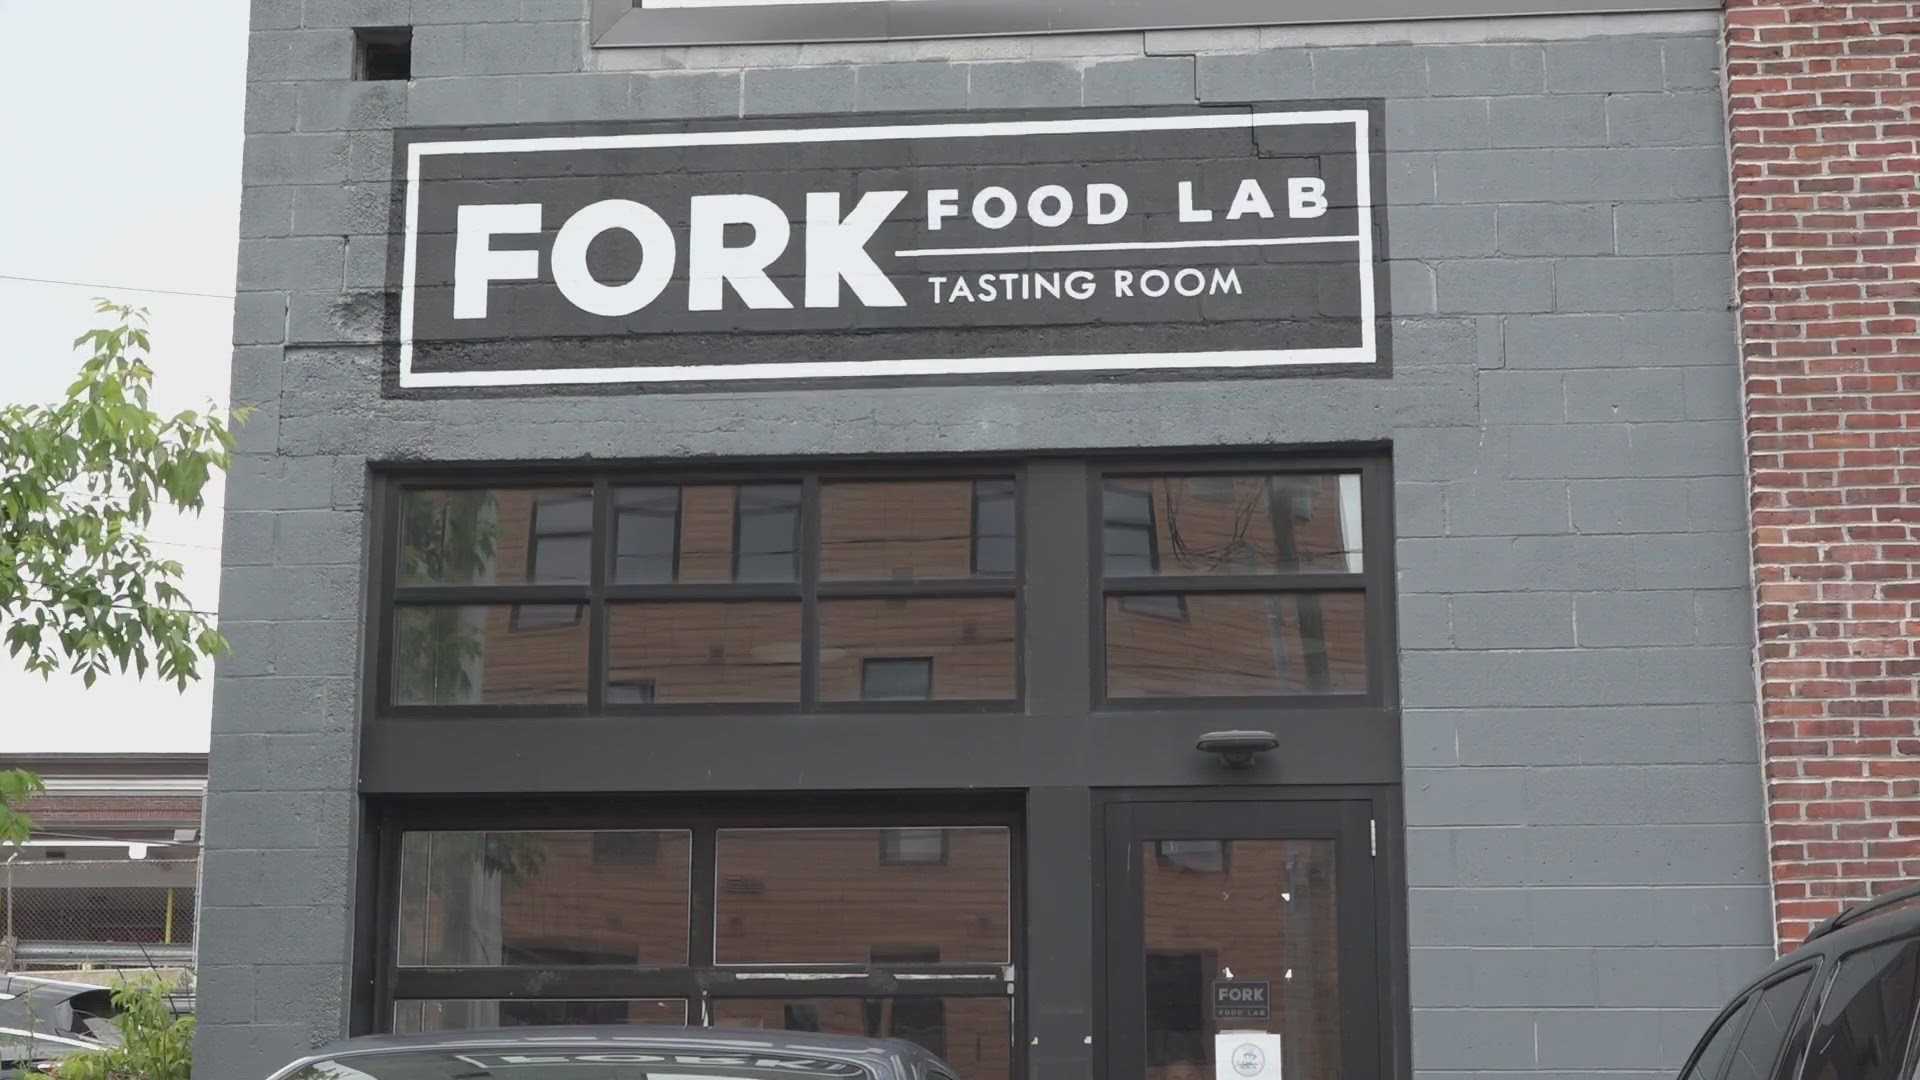 Fork Food Lab opened seven years ago and is now moving to a bigger space in South Portland due to increasing demand.